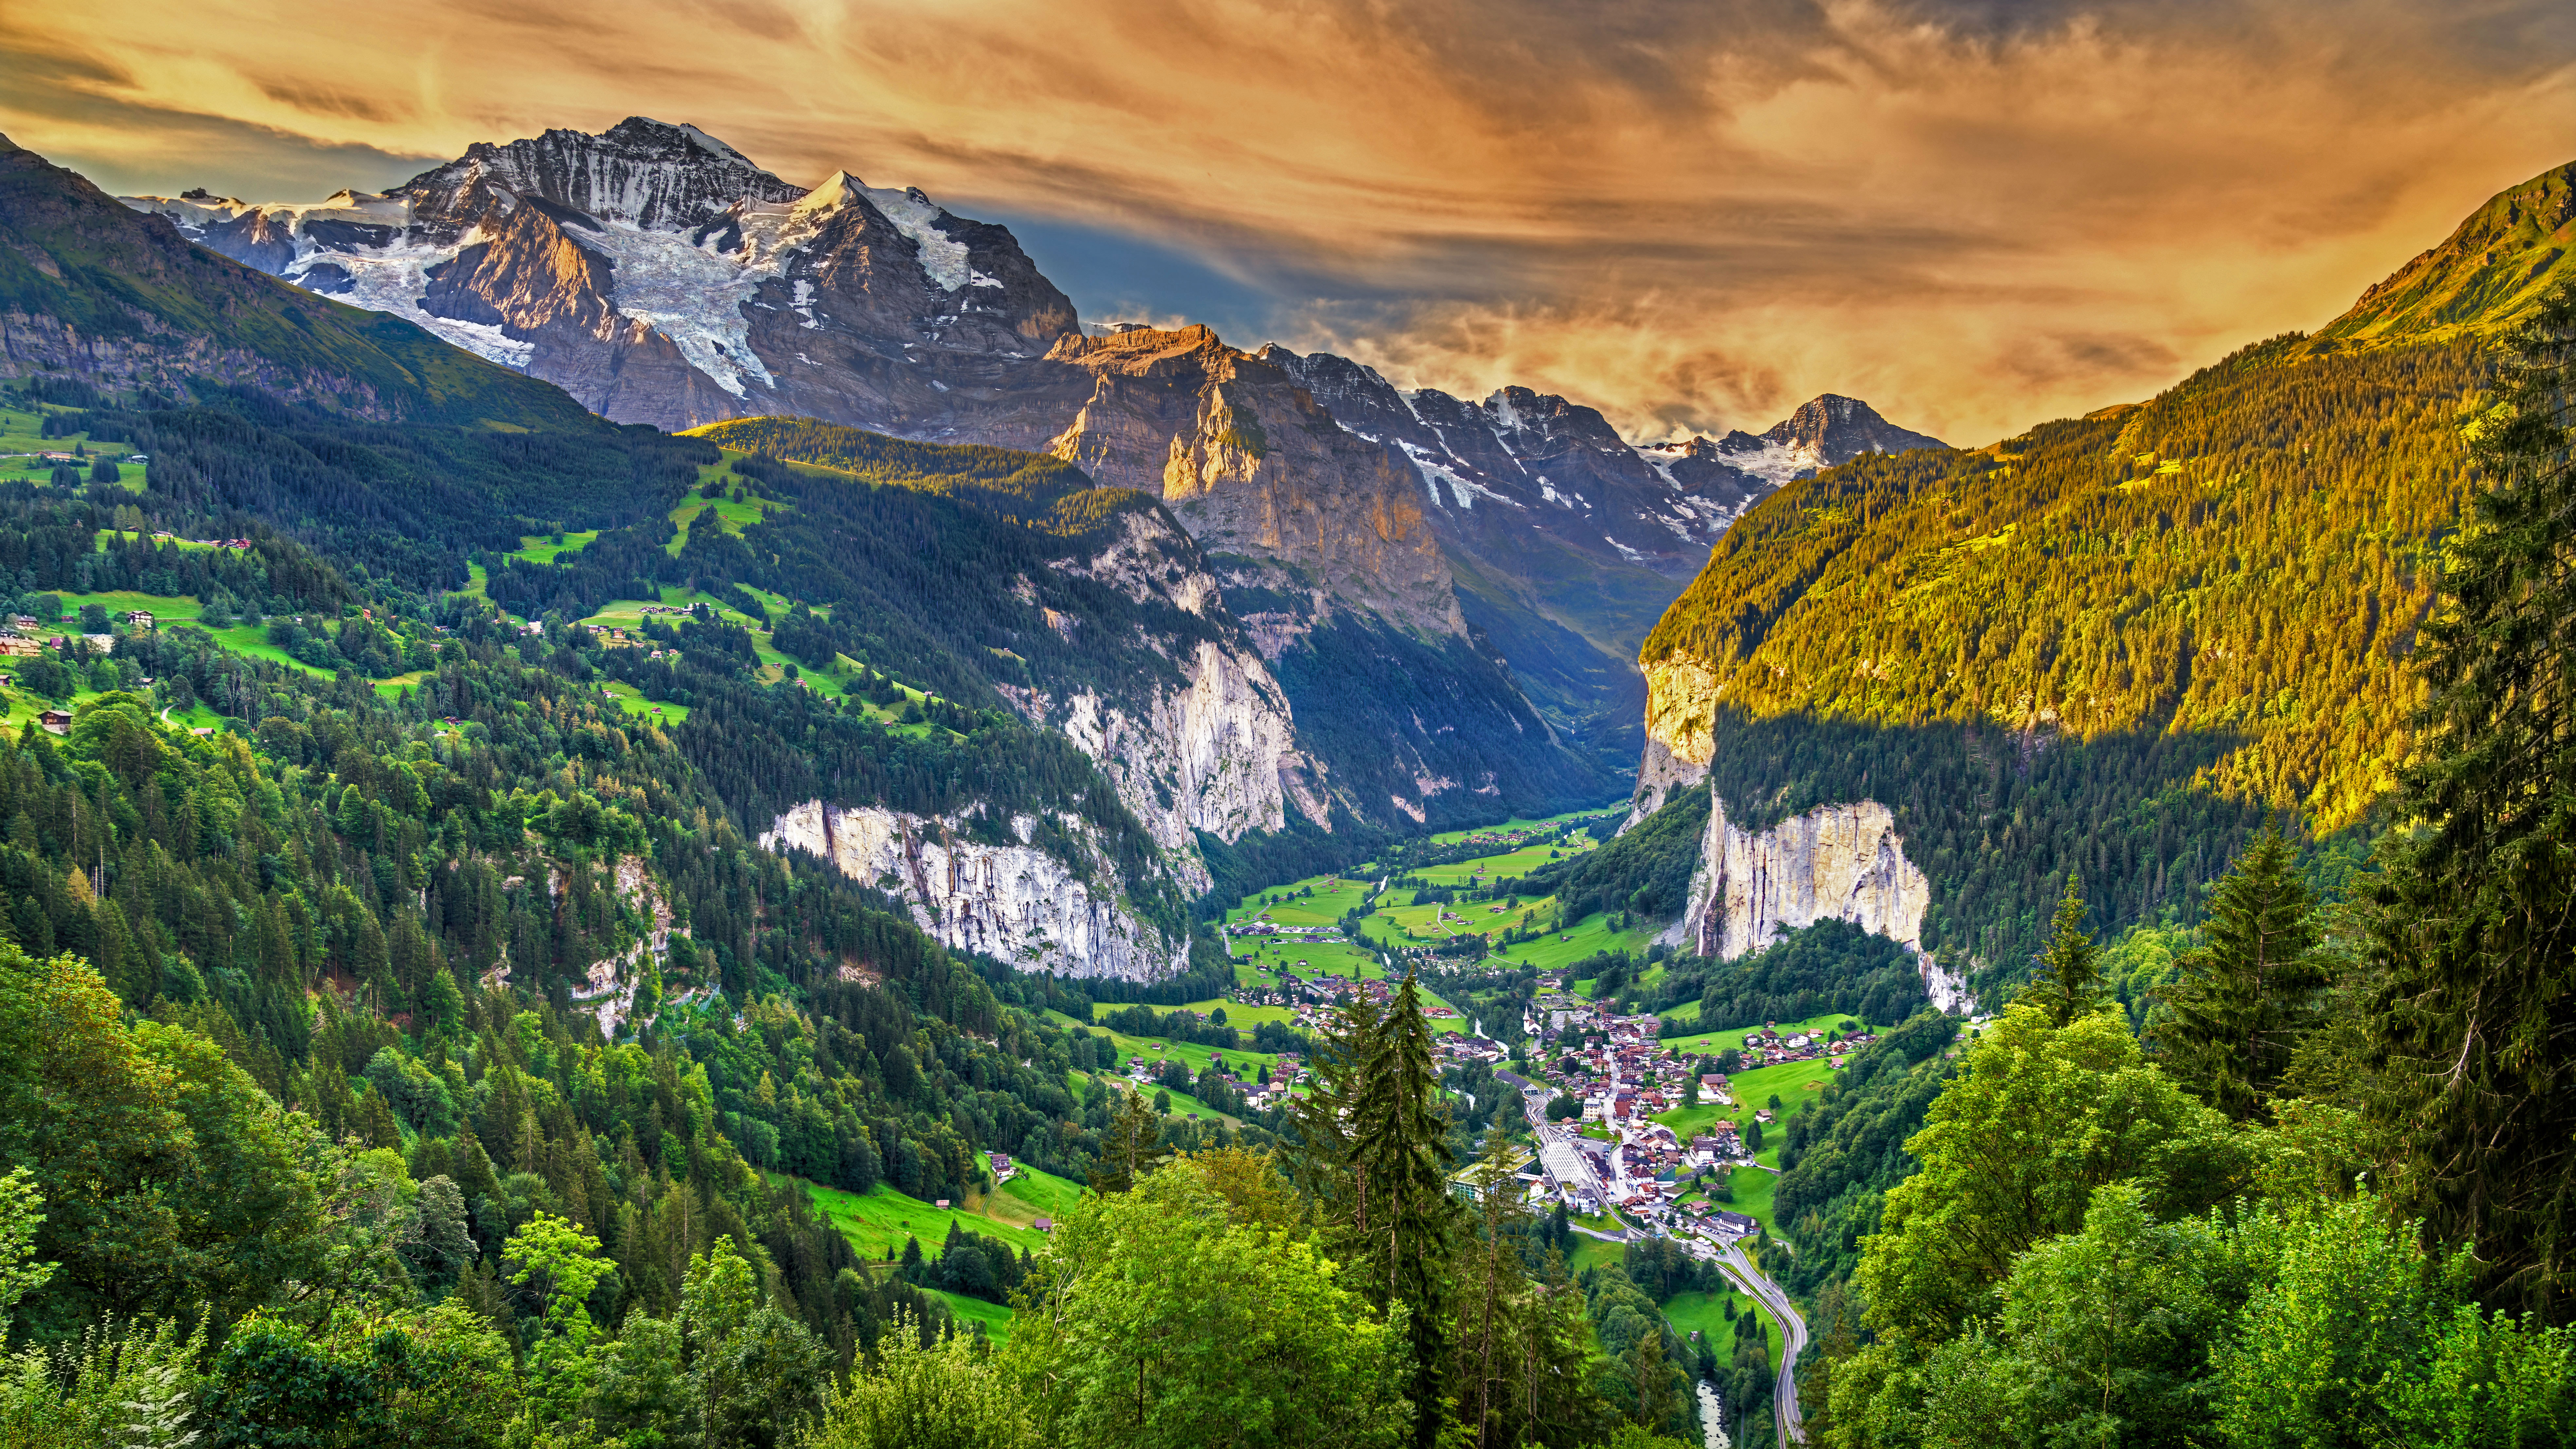 Lauterbrunnen Valley in the Swiss Alps by Leonid Andronov